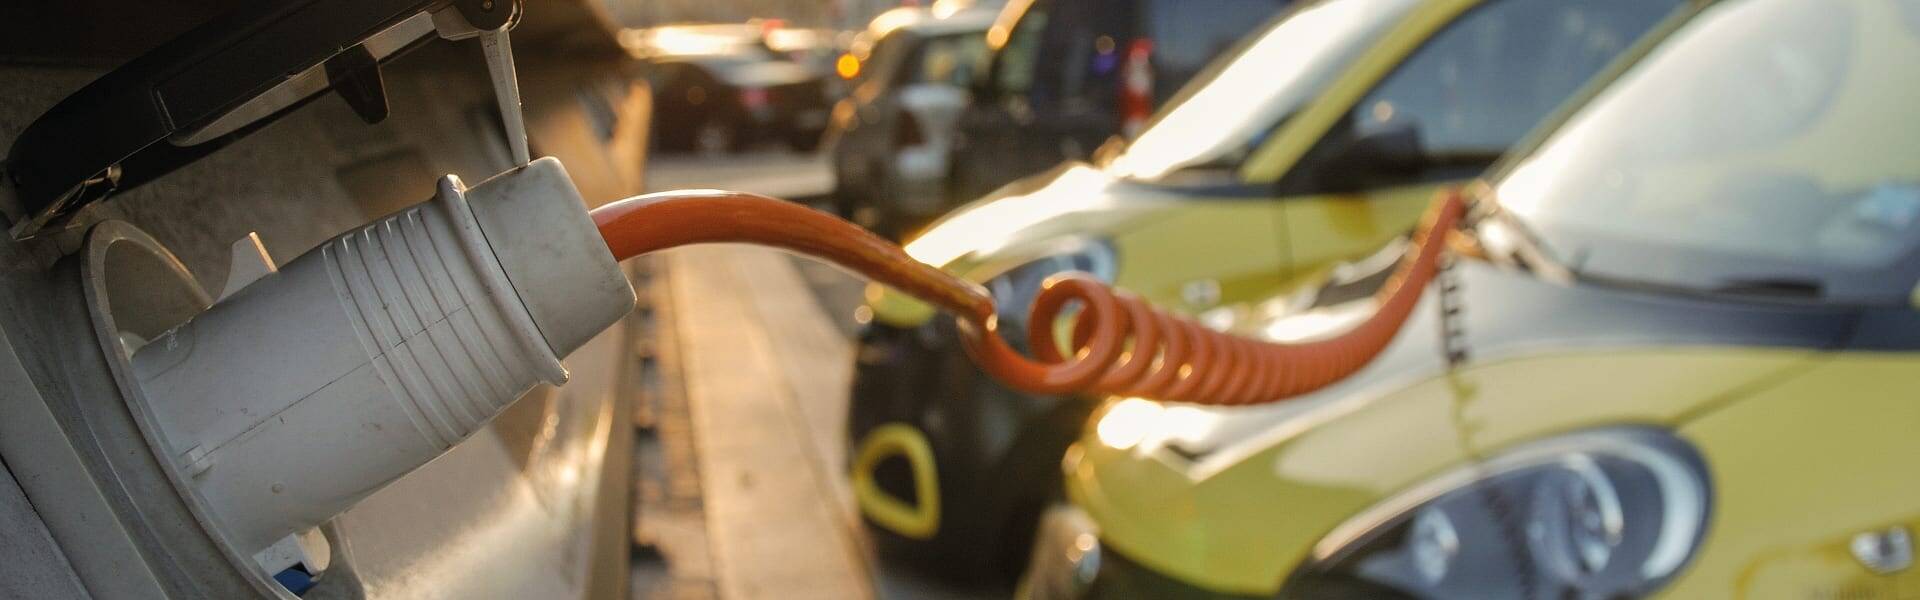 Government doubles funding for on-street EV charging